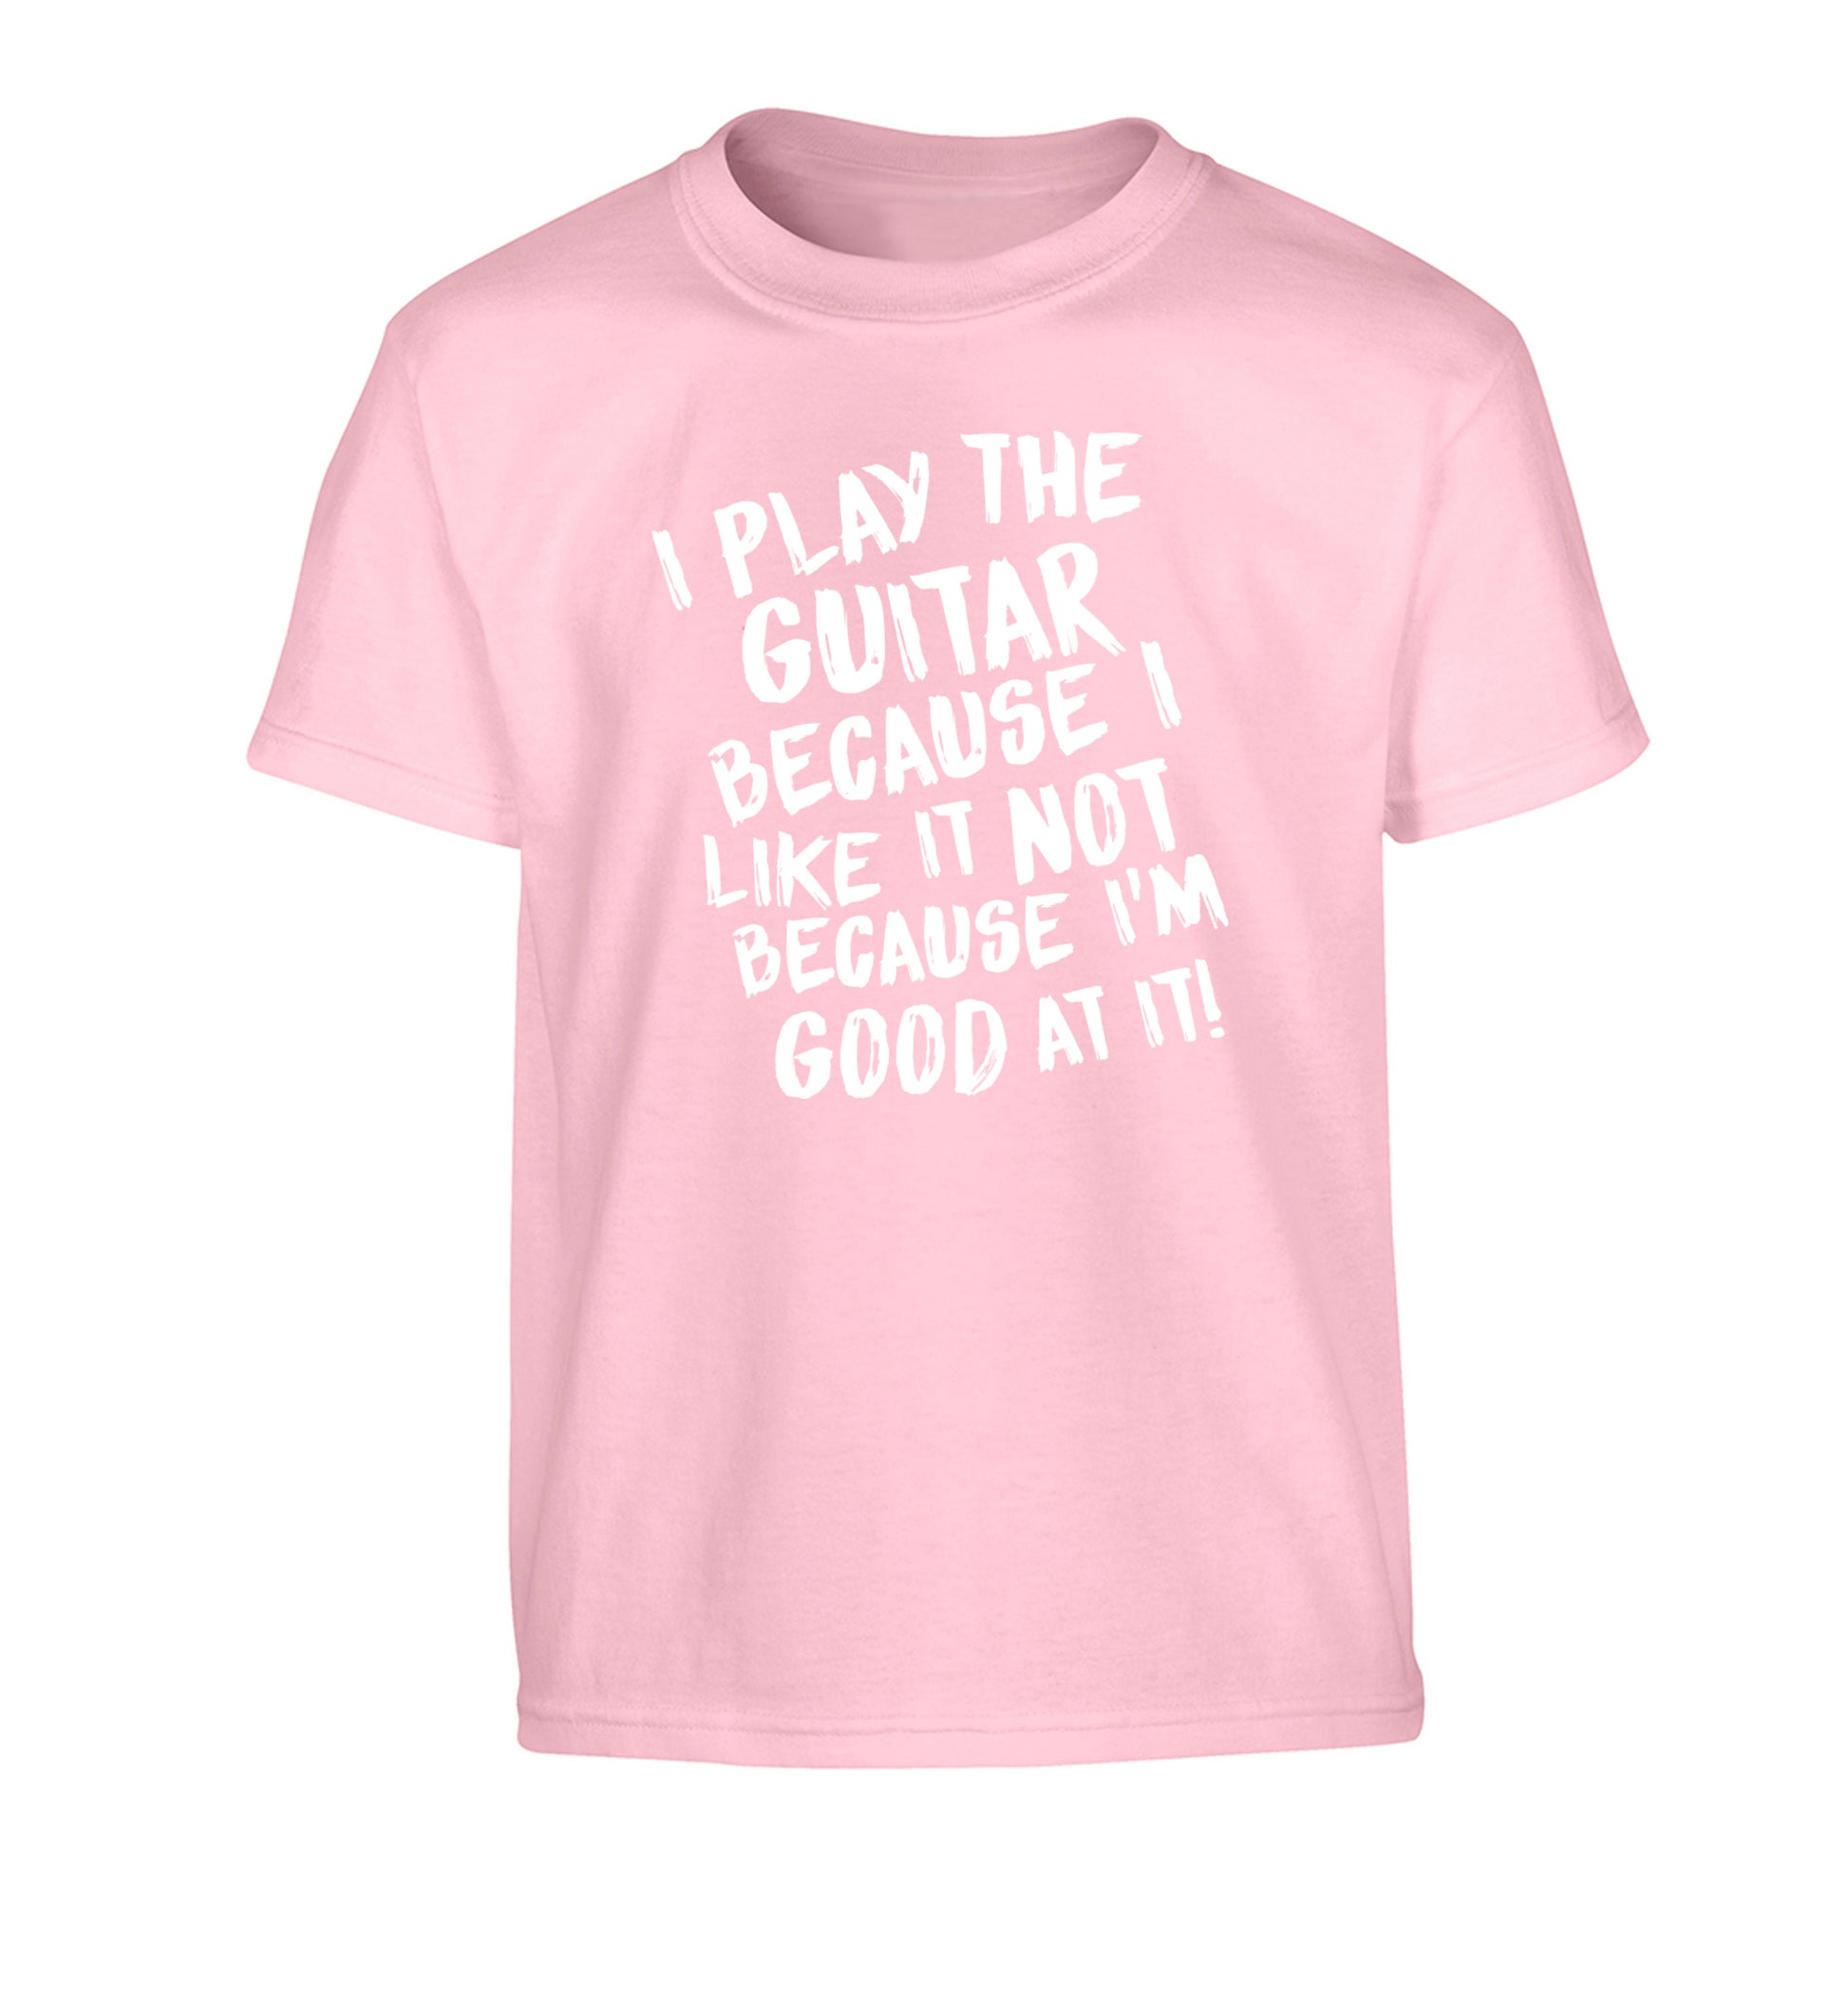 I play the guitar because I like it not because I'm good at it Children's light pink Tshirt 12-14 Years